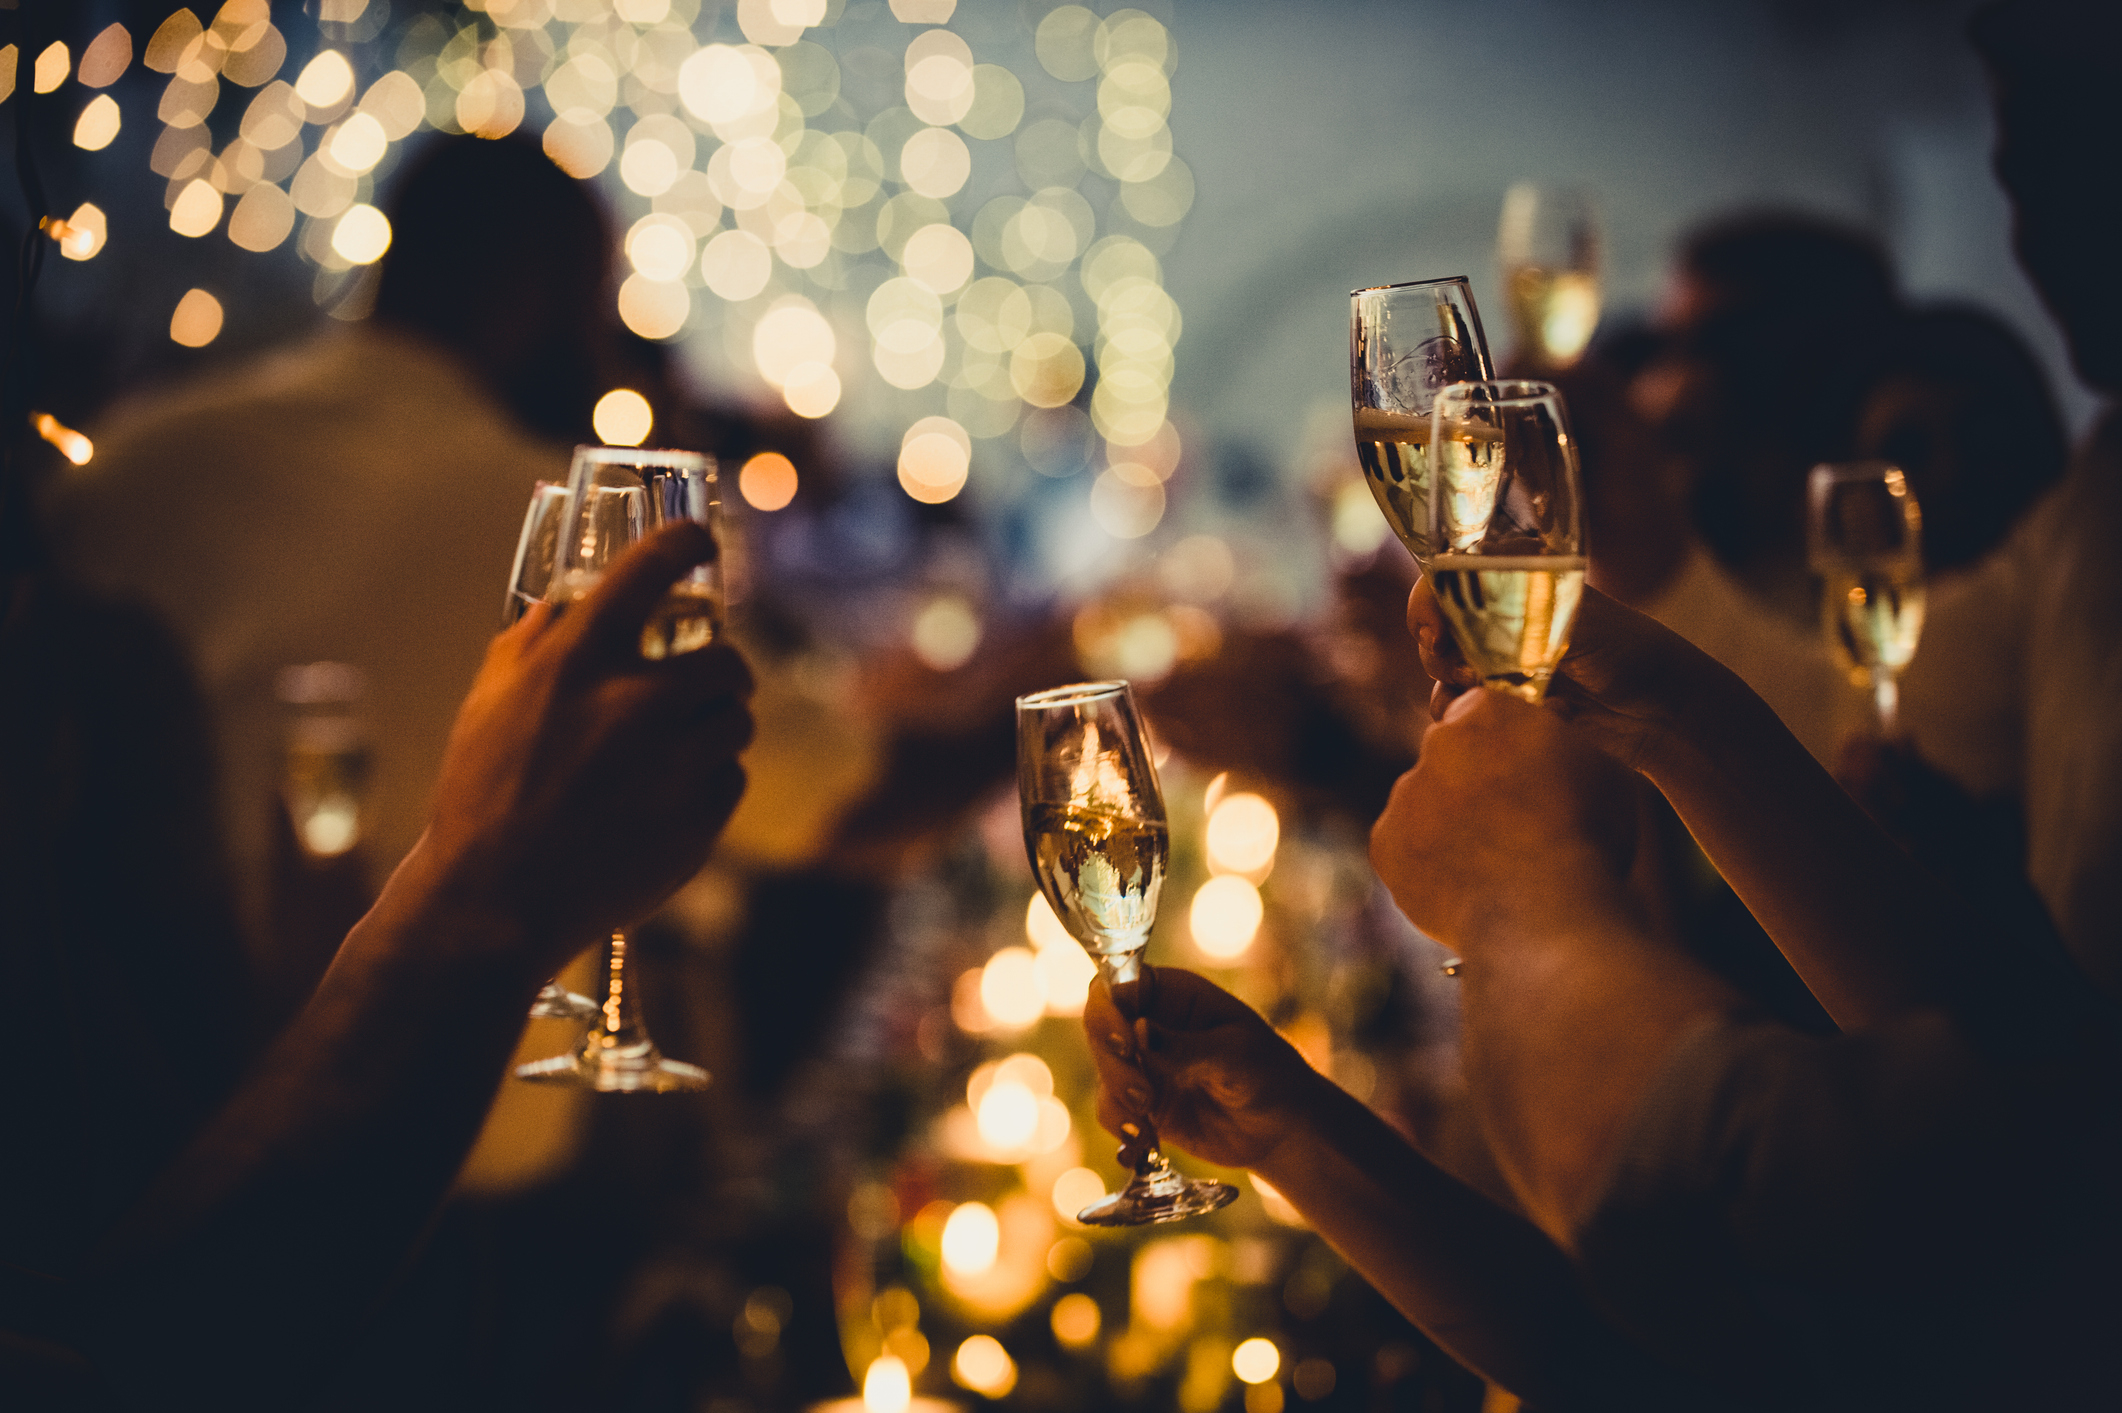 People toasting with champagne glasses at a dimly lit event with bokeh lights in the background